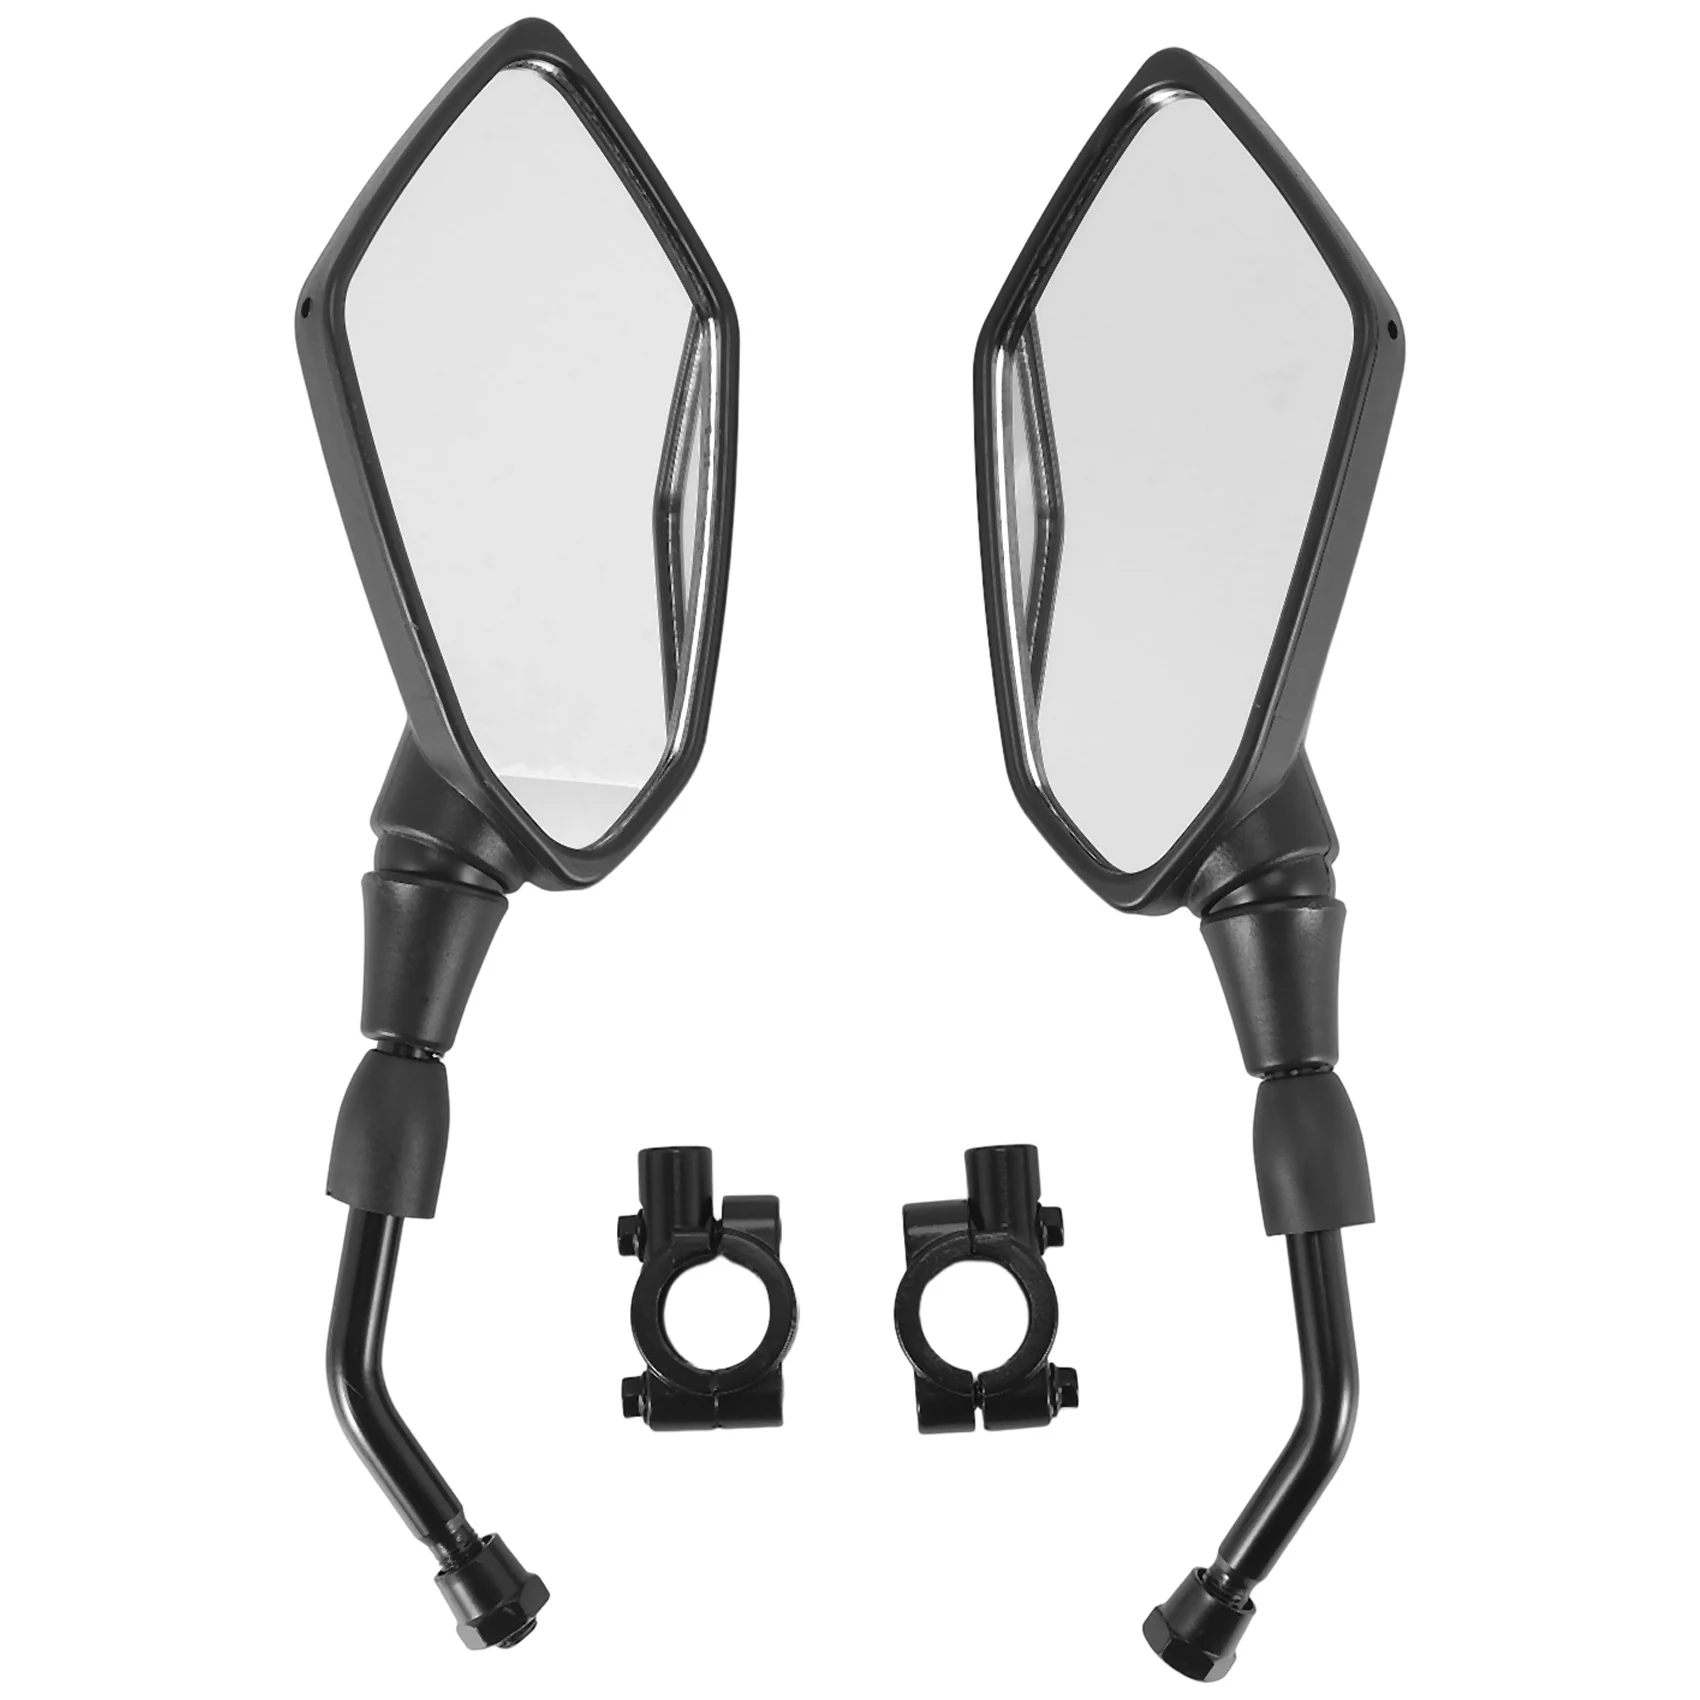 

Motorcycle Rear View Mirror Reflector Suitable for Sur Ron Sur-Ron Surron Light Bee Electric Off-Road Bike